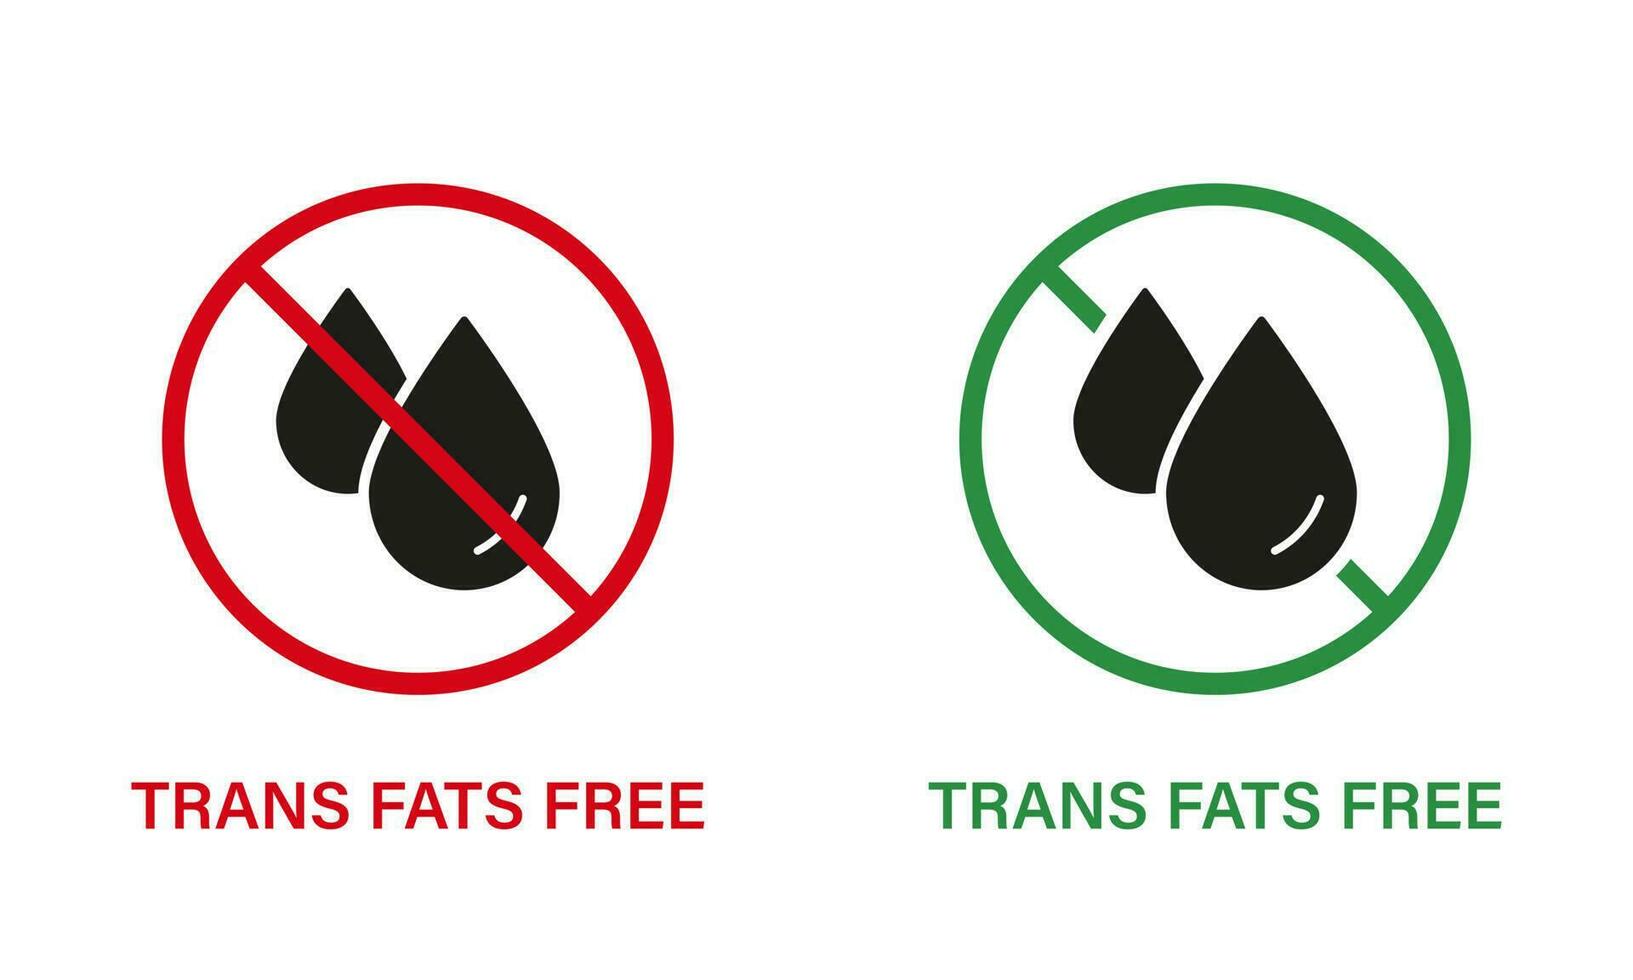 Free Trans Fat Silhouette Icon Set. Trans Fat Stop Sign. Ban Transfat in Product Food. No Cholesterol Logo. 0 Trans fat Label. Oil Forbidden Symbol. Isolated Vector Illustration.